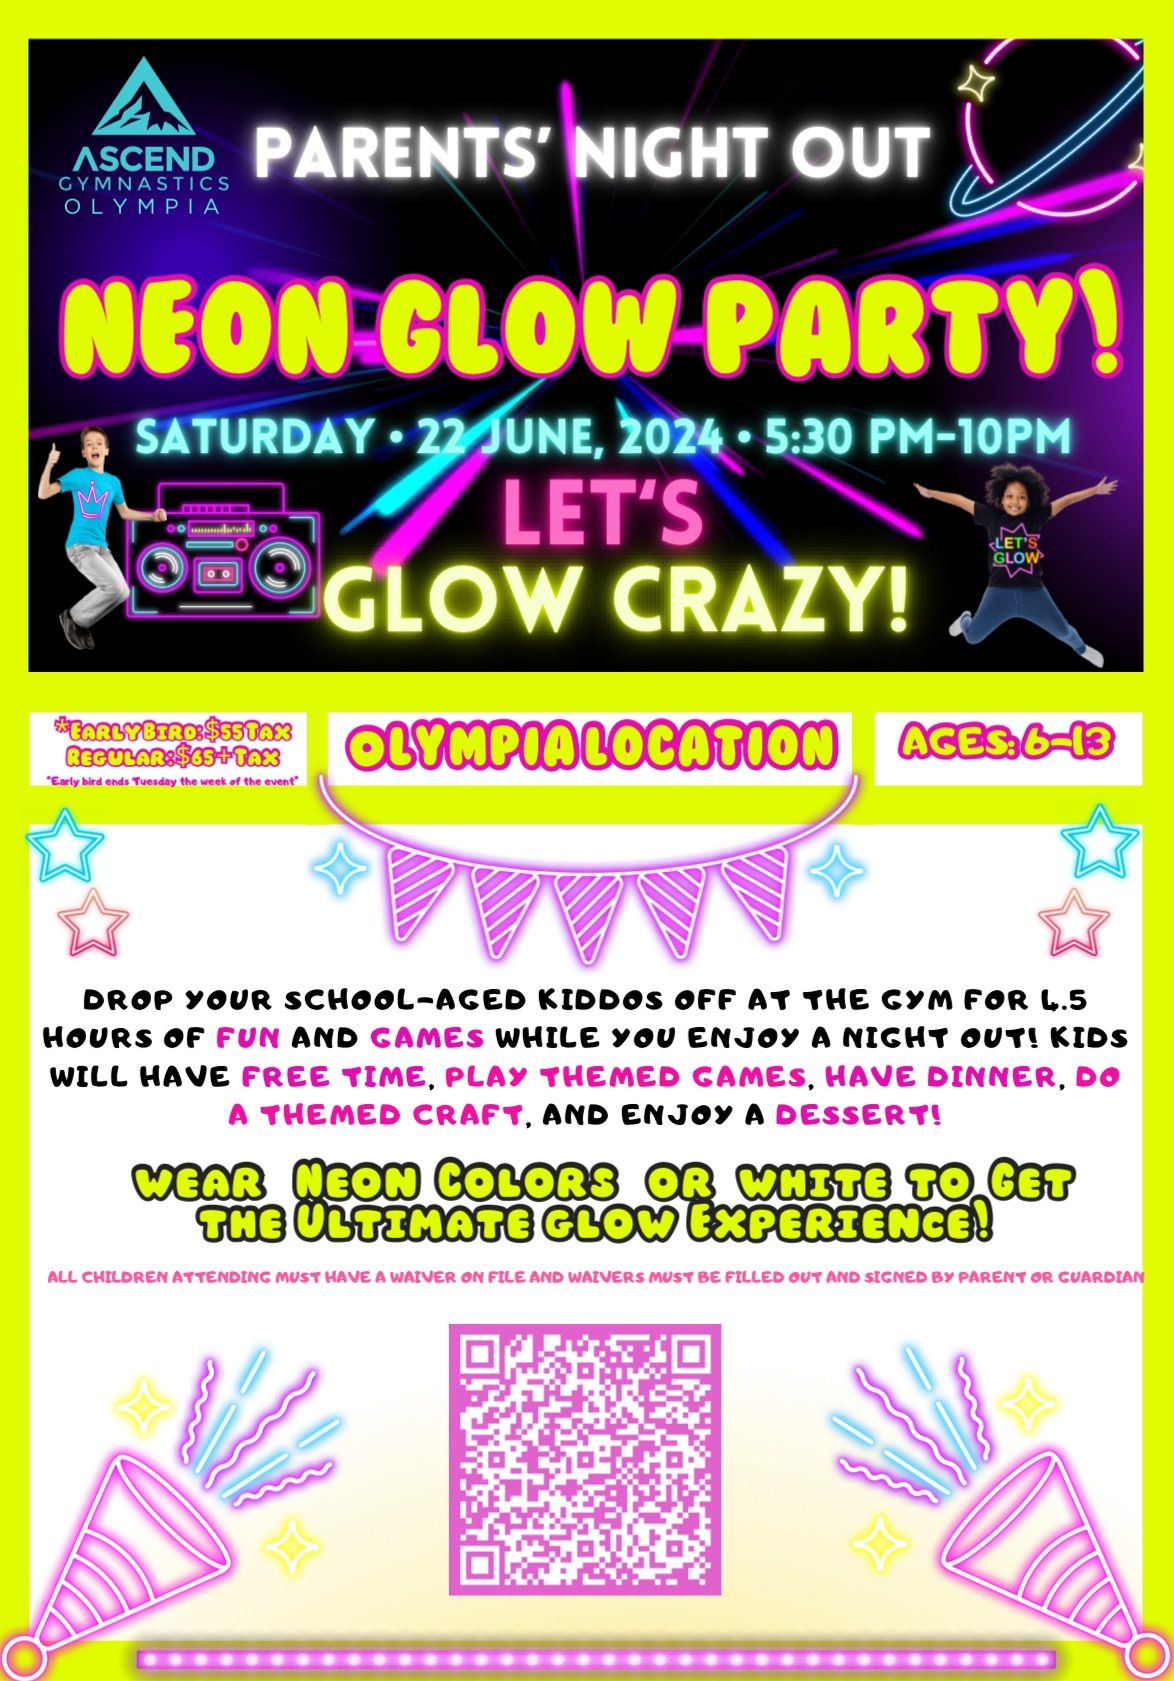 NEON GLOW PARTY PARENTS NIGHT OUT!